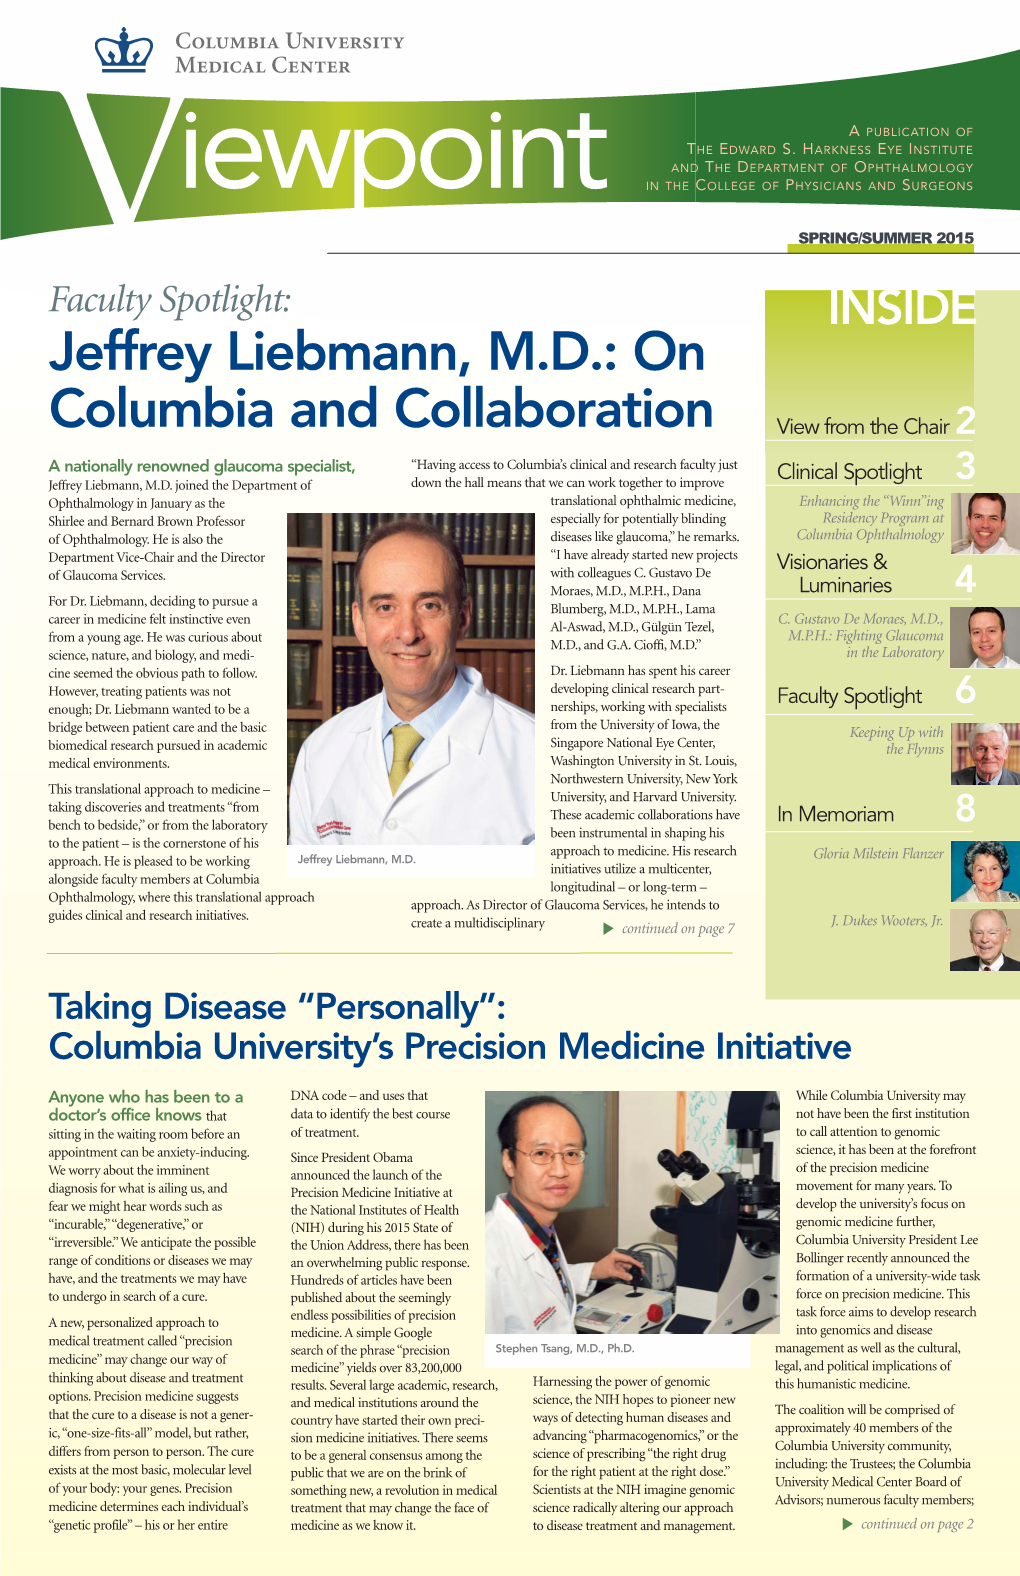 Jeffrey Liebmann, M.D.: on Columbia and Collaboration Ophthalmic Medicine